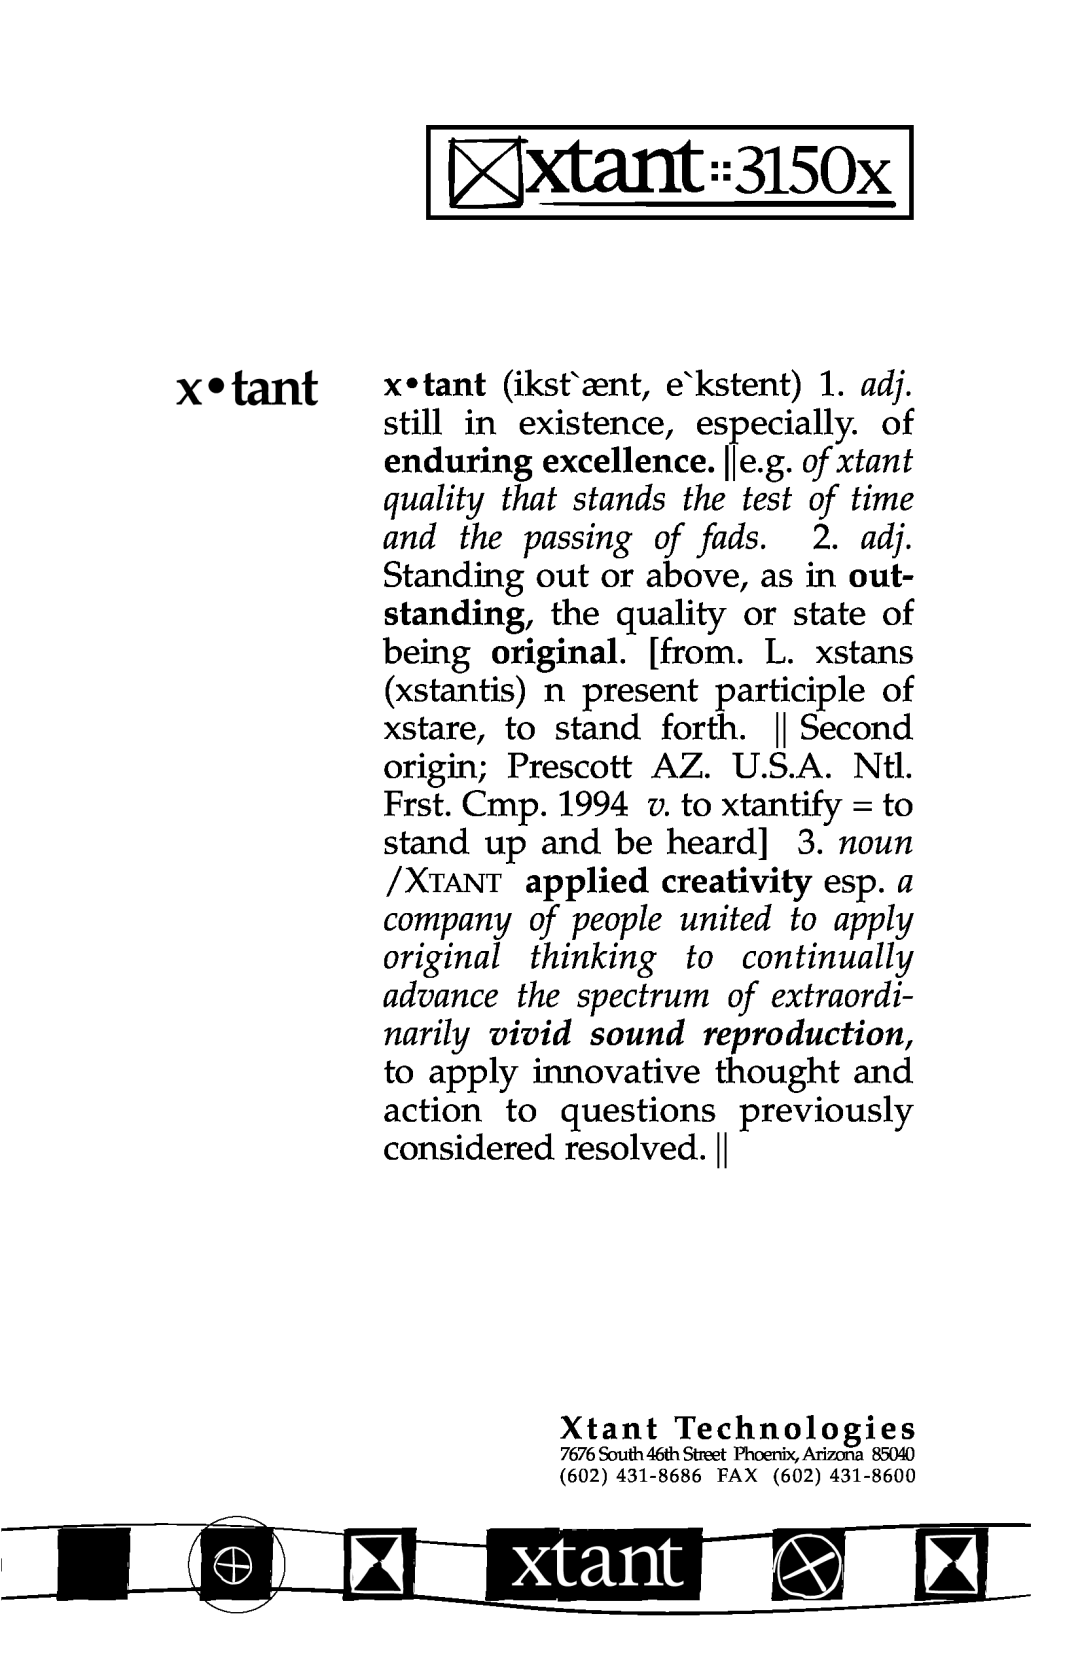 Xtant 3150X x tant, enduring excellence. e.g. of xtant, quality that stands the test of time, applied creativity esp. a 